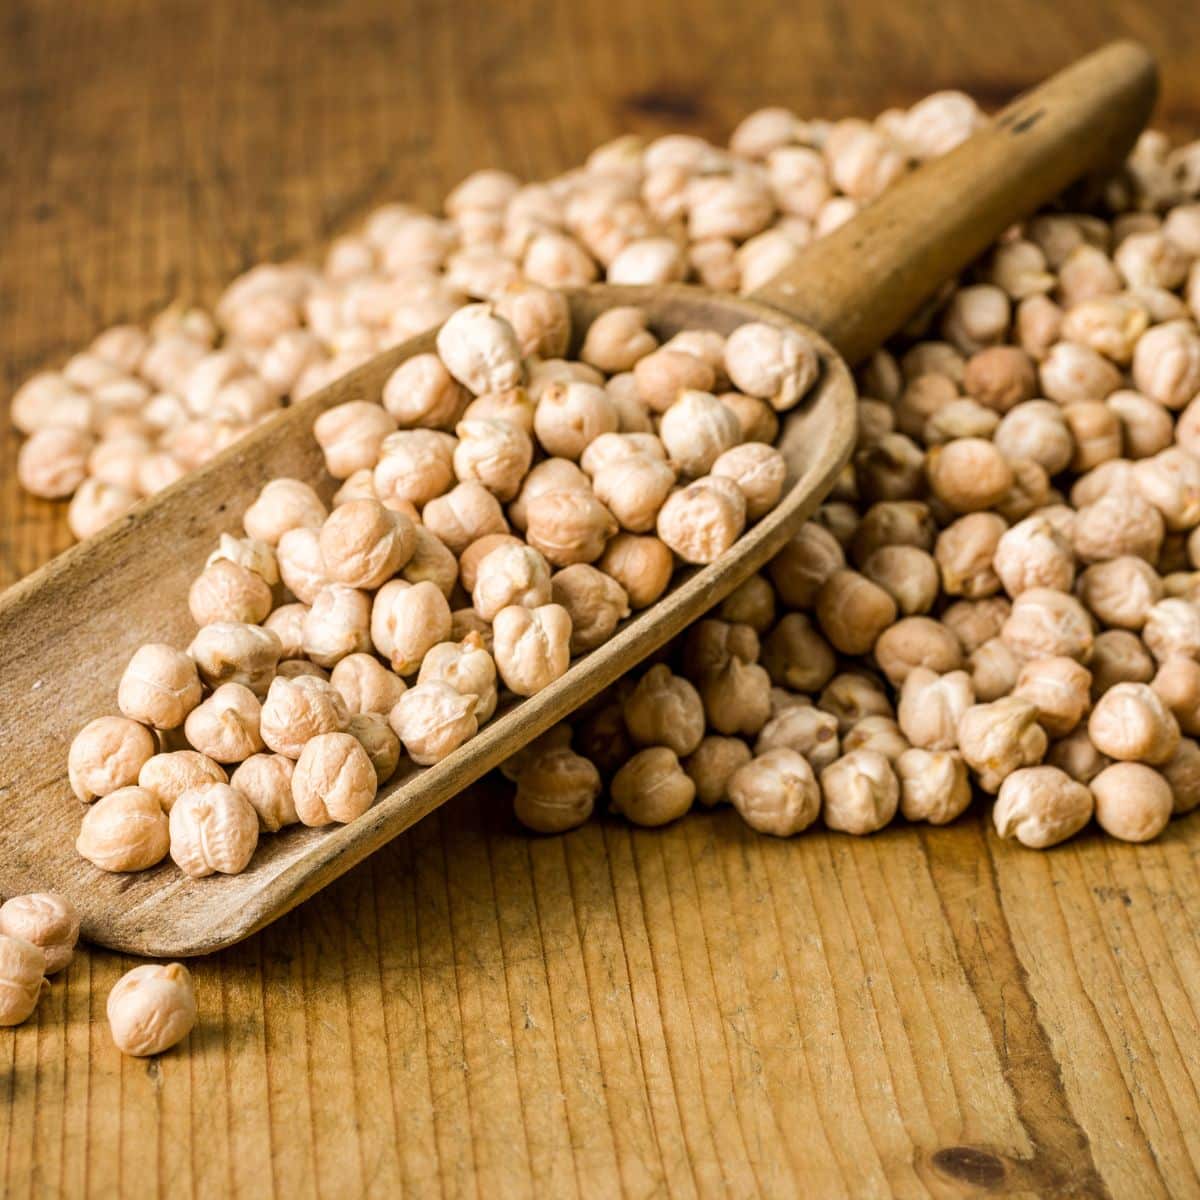 Square image of chickpeas on a wooden background.